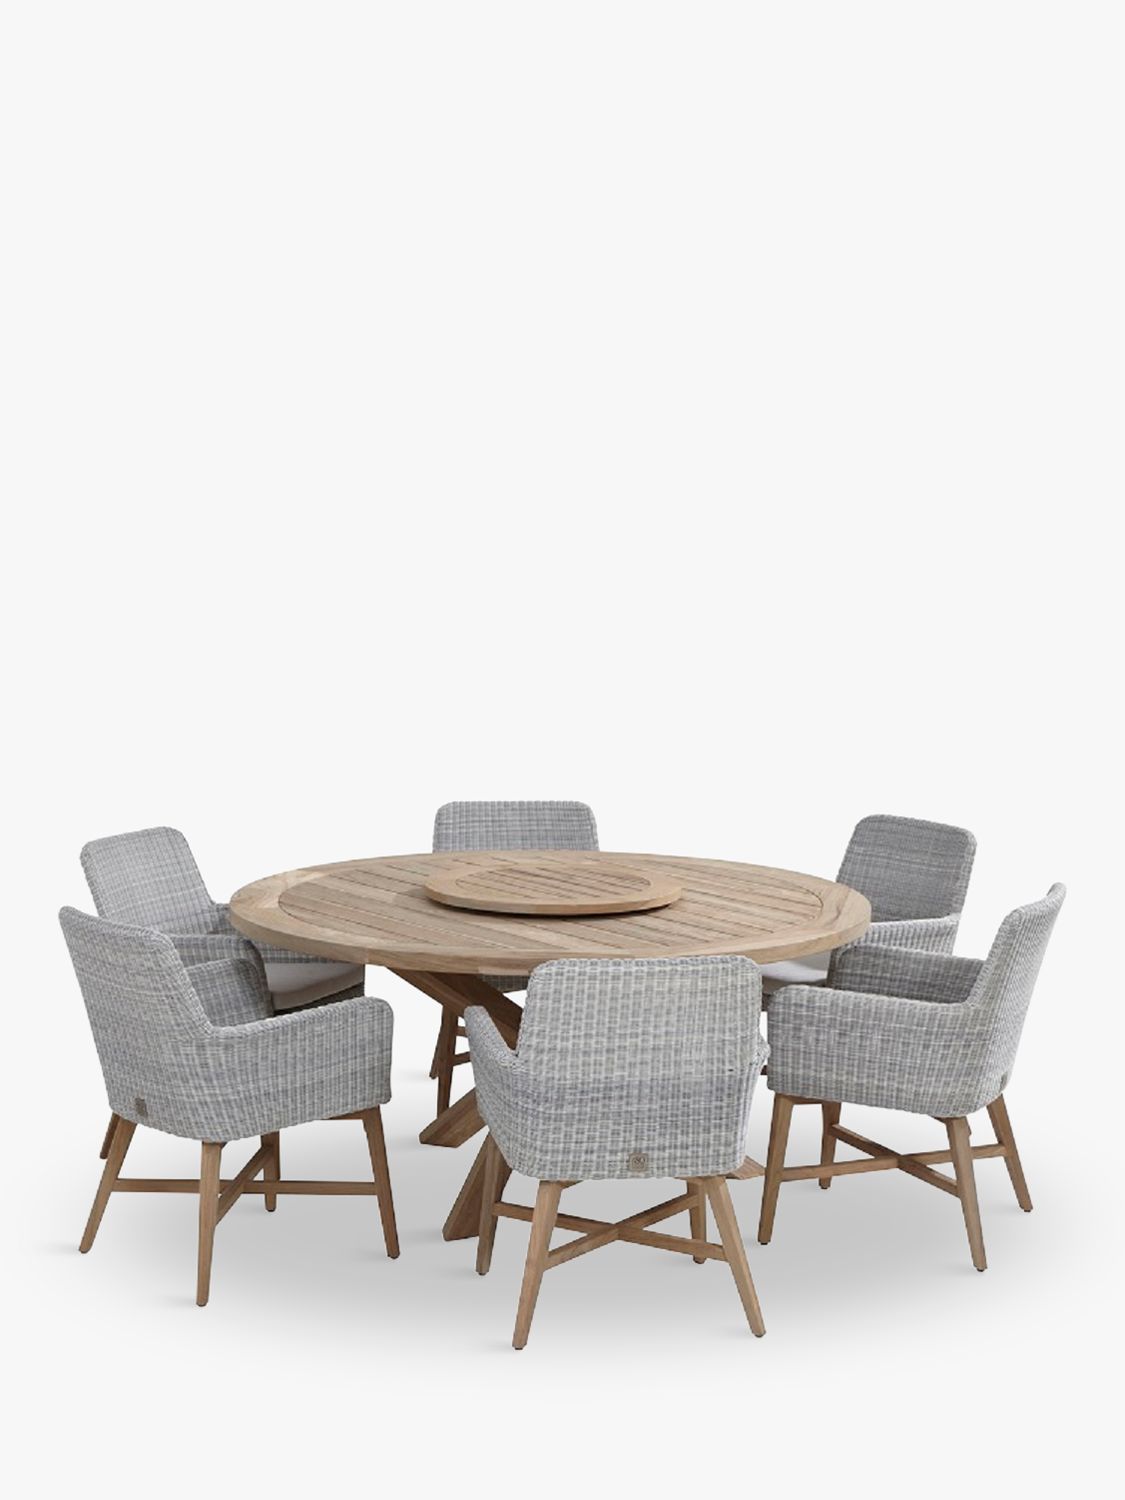 Photo of 4 seasons outdoor lisboa 6-seater round garden dining table & chairs set polyloom ice